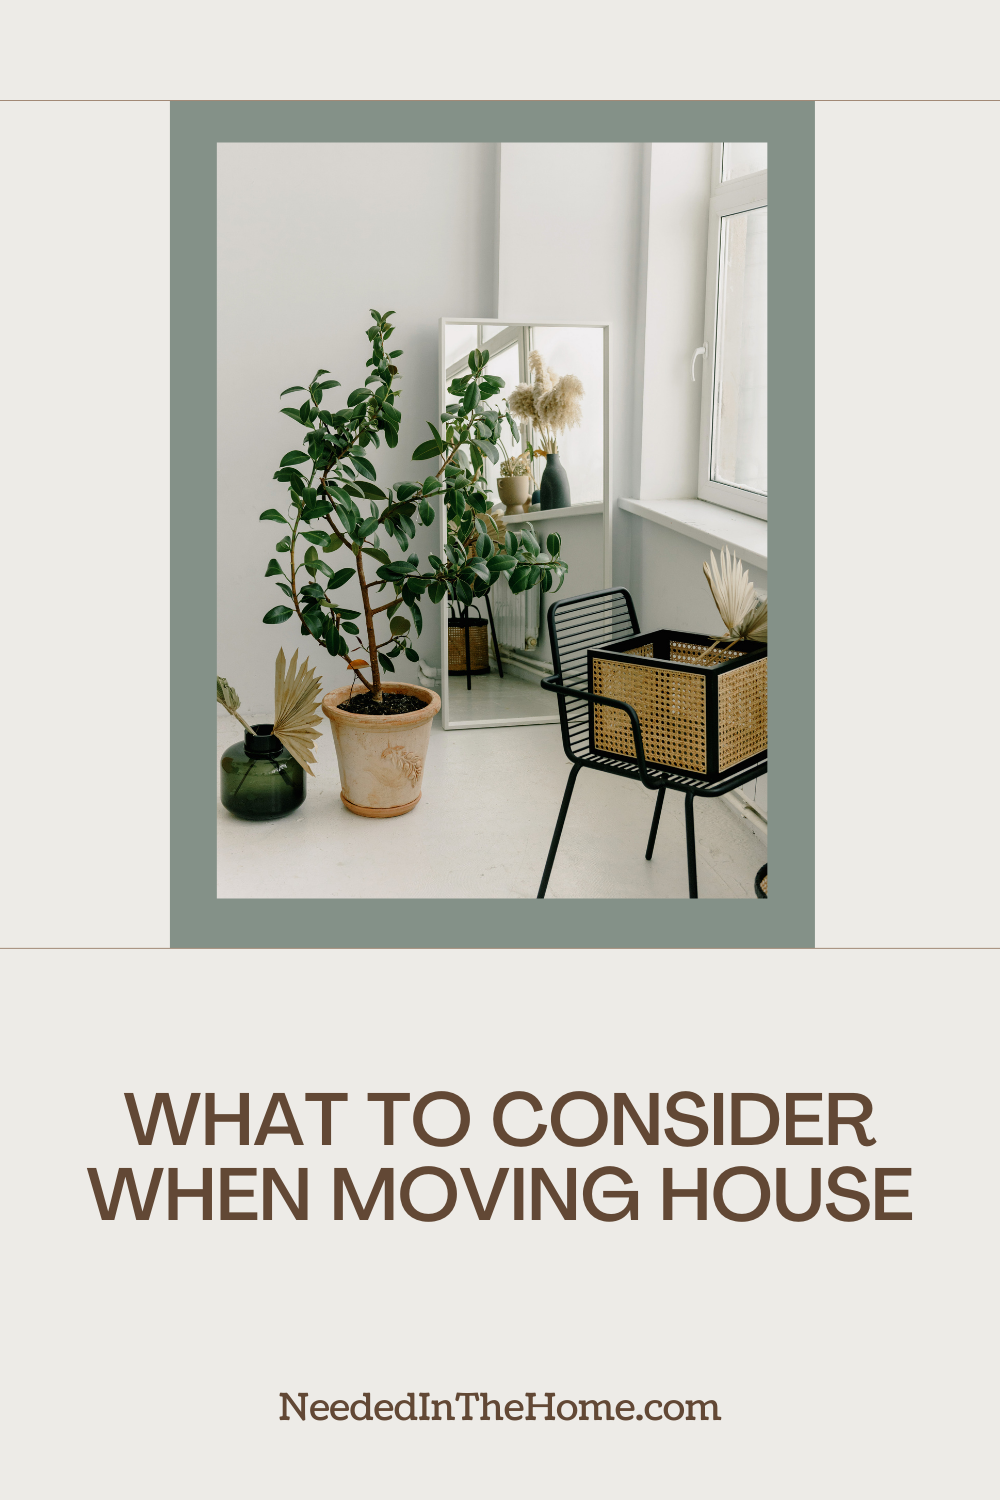 pinterest-pin-description what to consider when moving house image of plants chair window mirror where to place them in new home neededinthehome